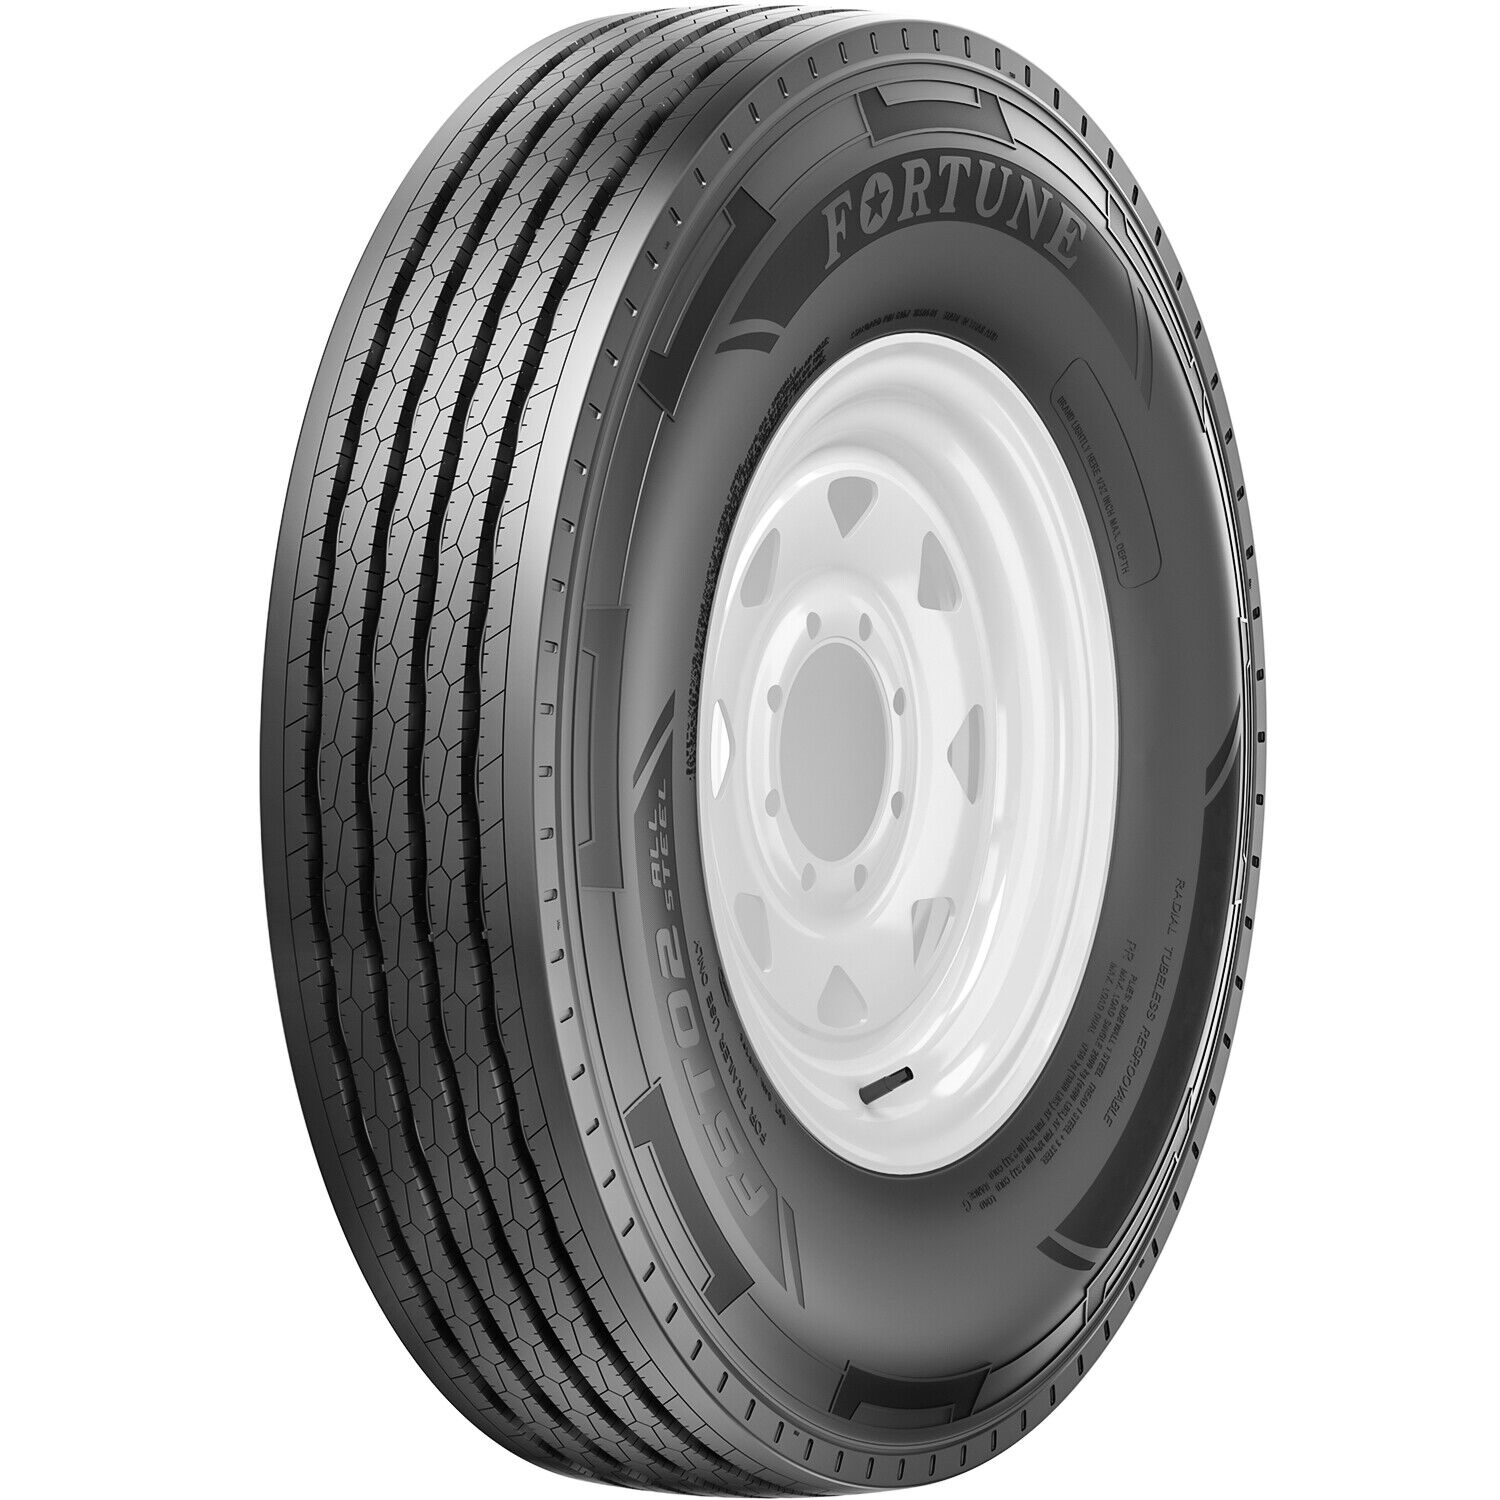 2 Tires Fortune FST02 All Steel ST 225/90R16 Load G 14 Ply Trailer